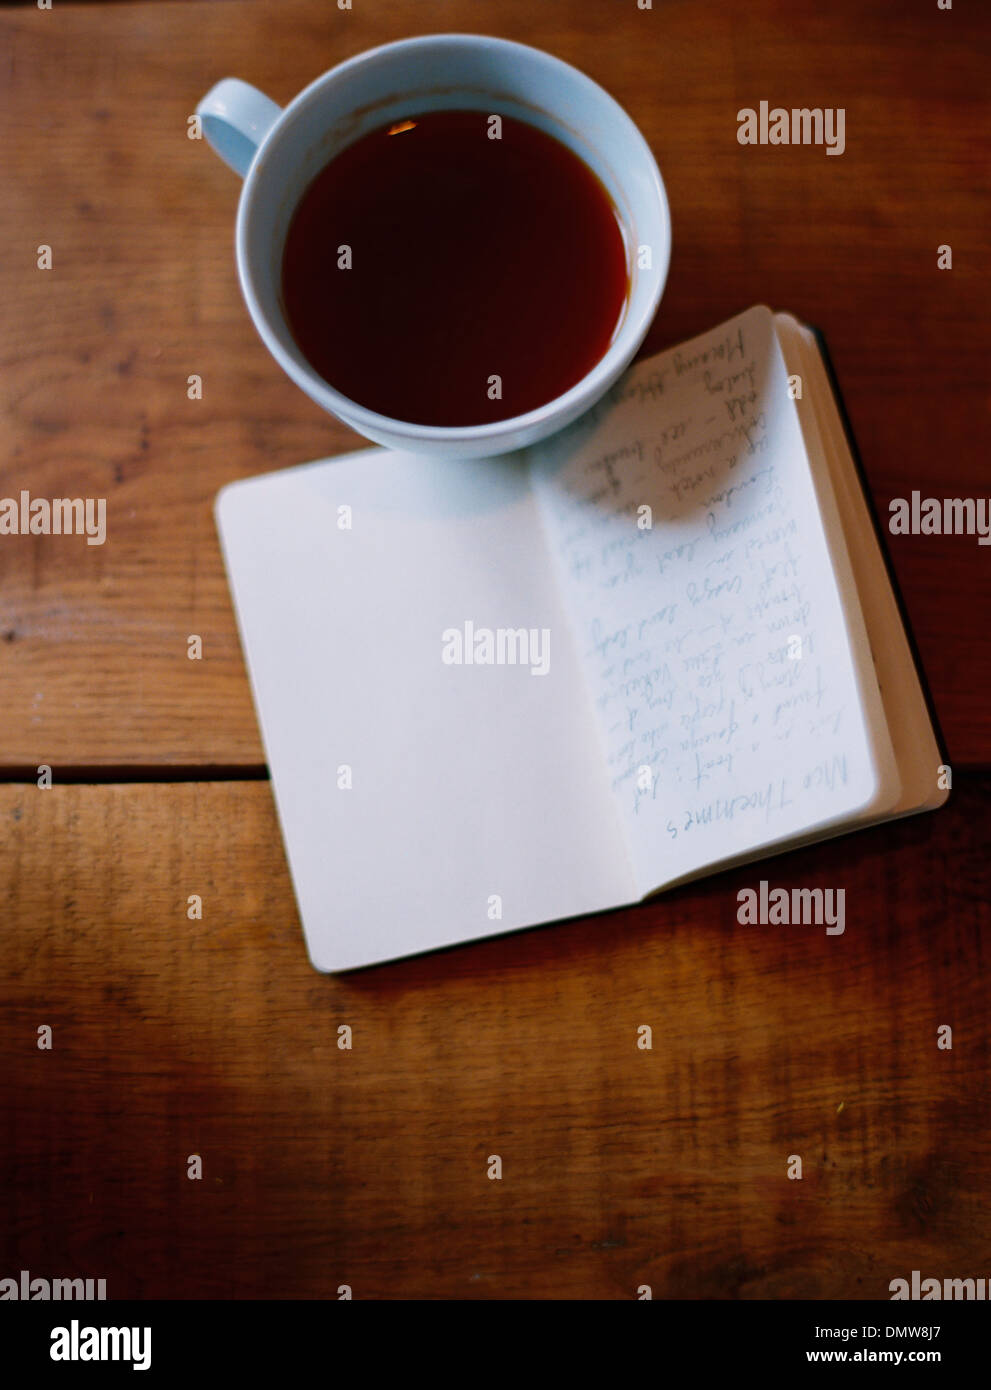 A cold cup of coffee and a handwritten journal. Stock Photo